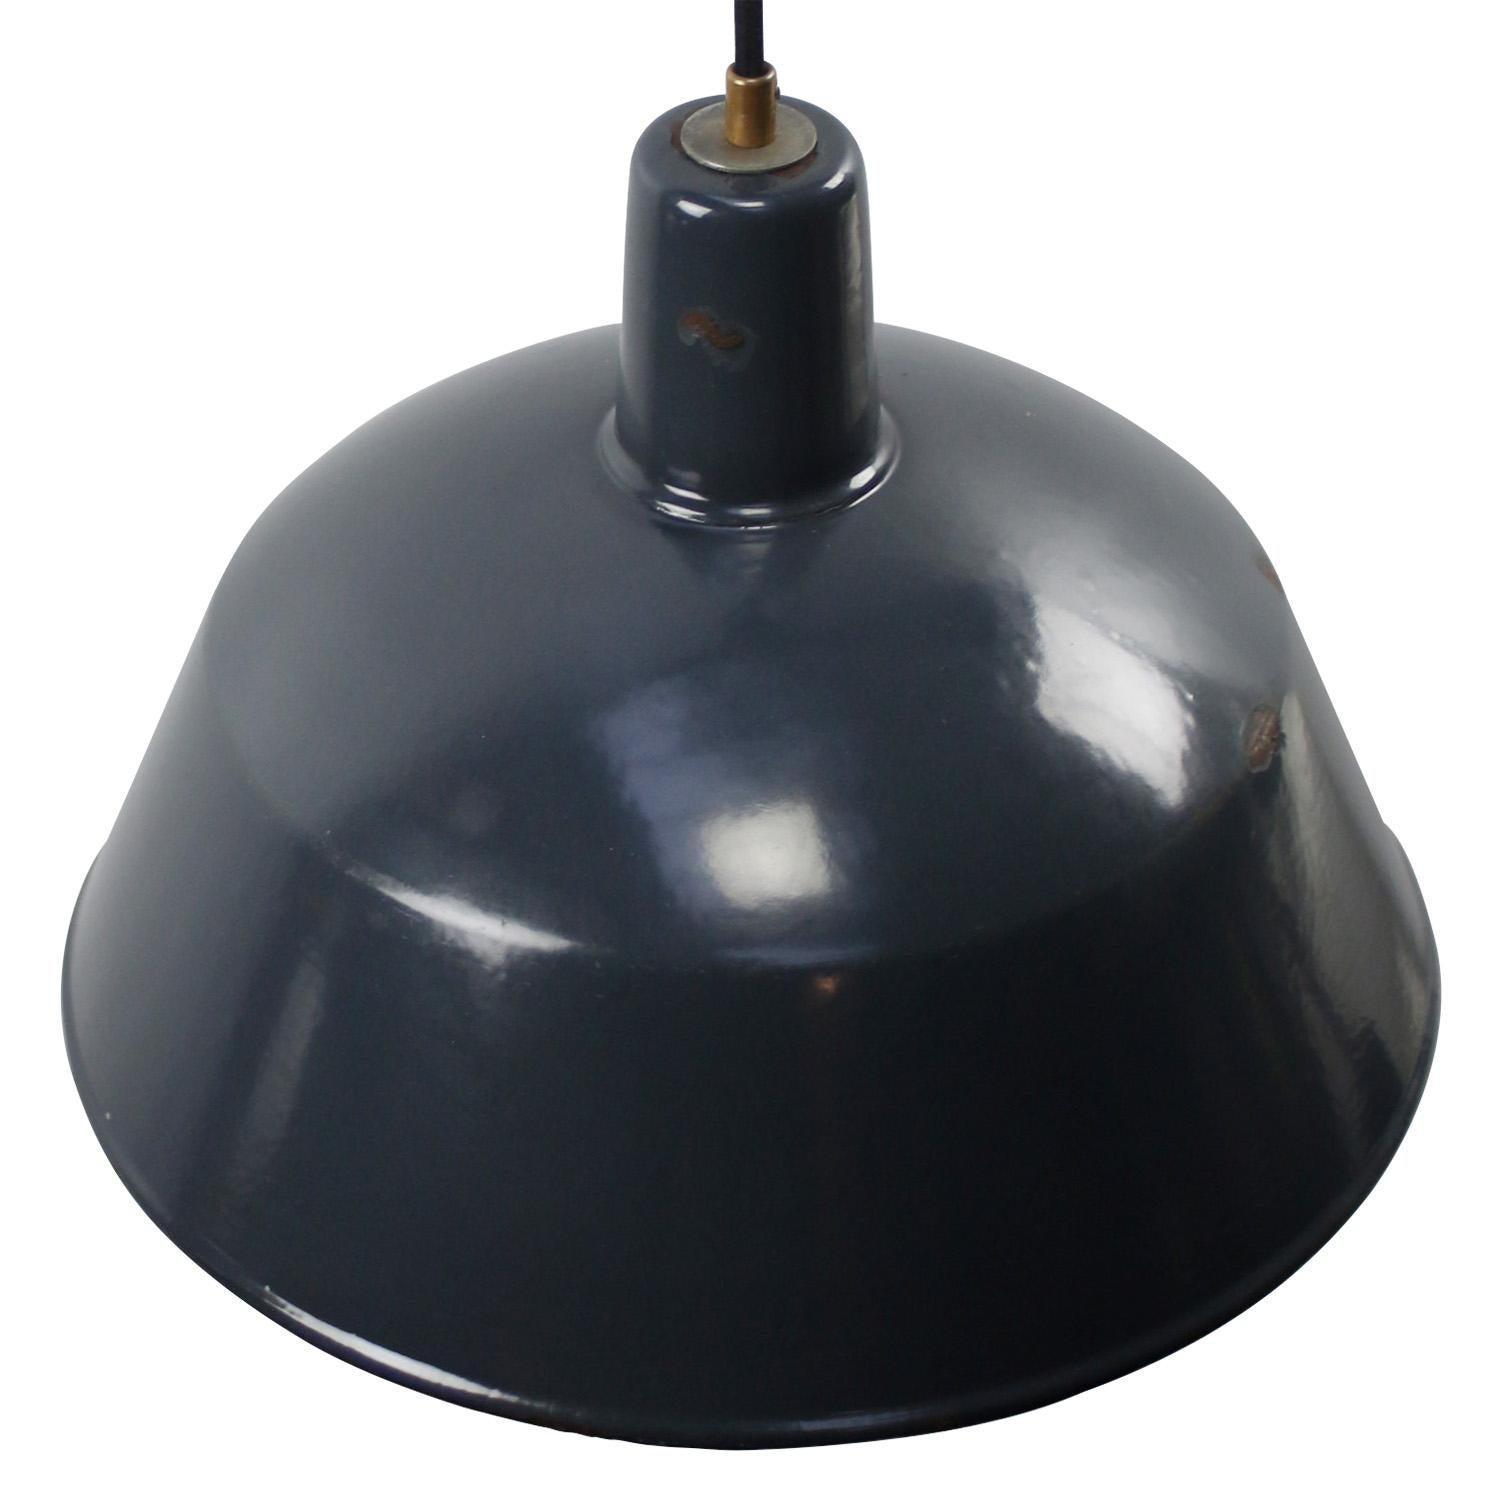 Blue industrial pendant. 
Blue enamel with black type, white interior

Weight: 2.00 kg / 4.4 lb

Priced per individual item. All lamps have been made suitable by international standards for incandescent light bulbs, energy-efficient and LED bulbs.